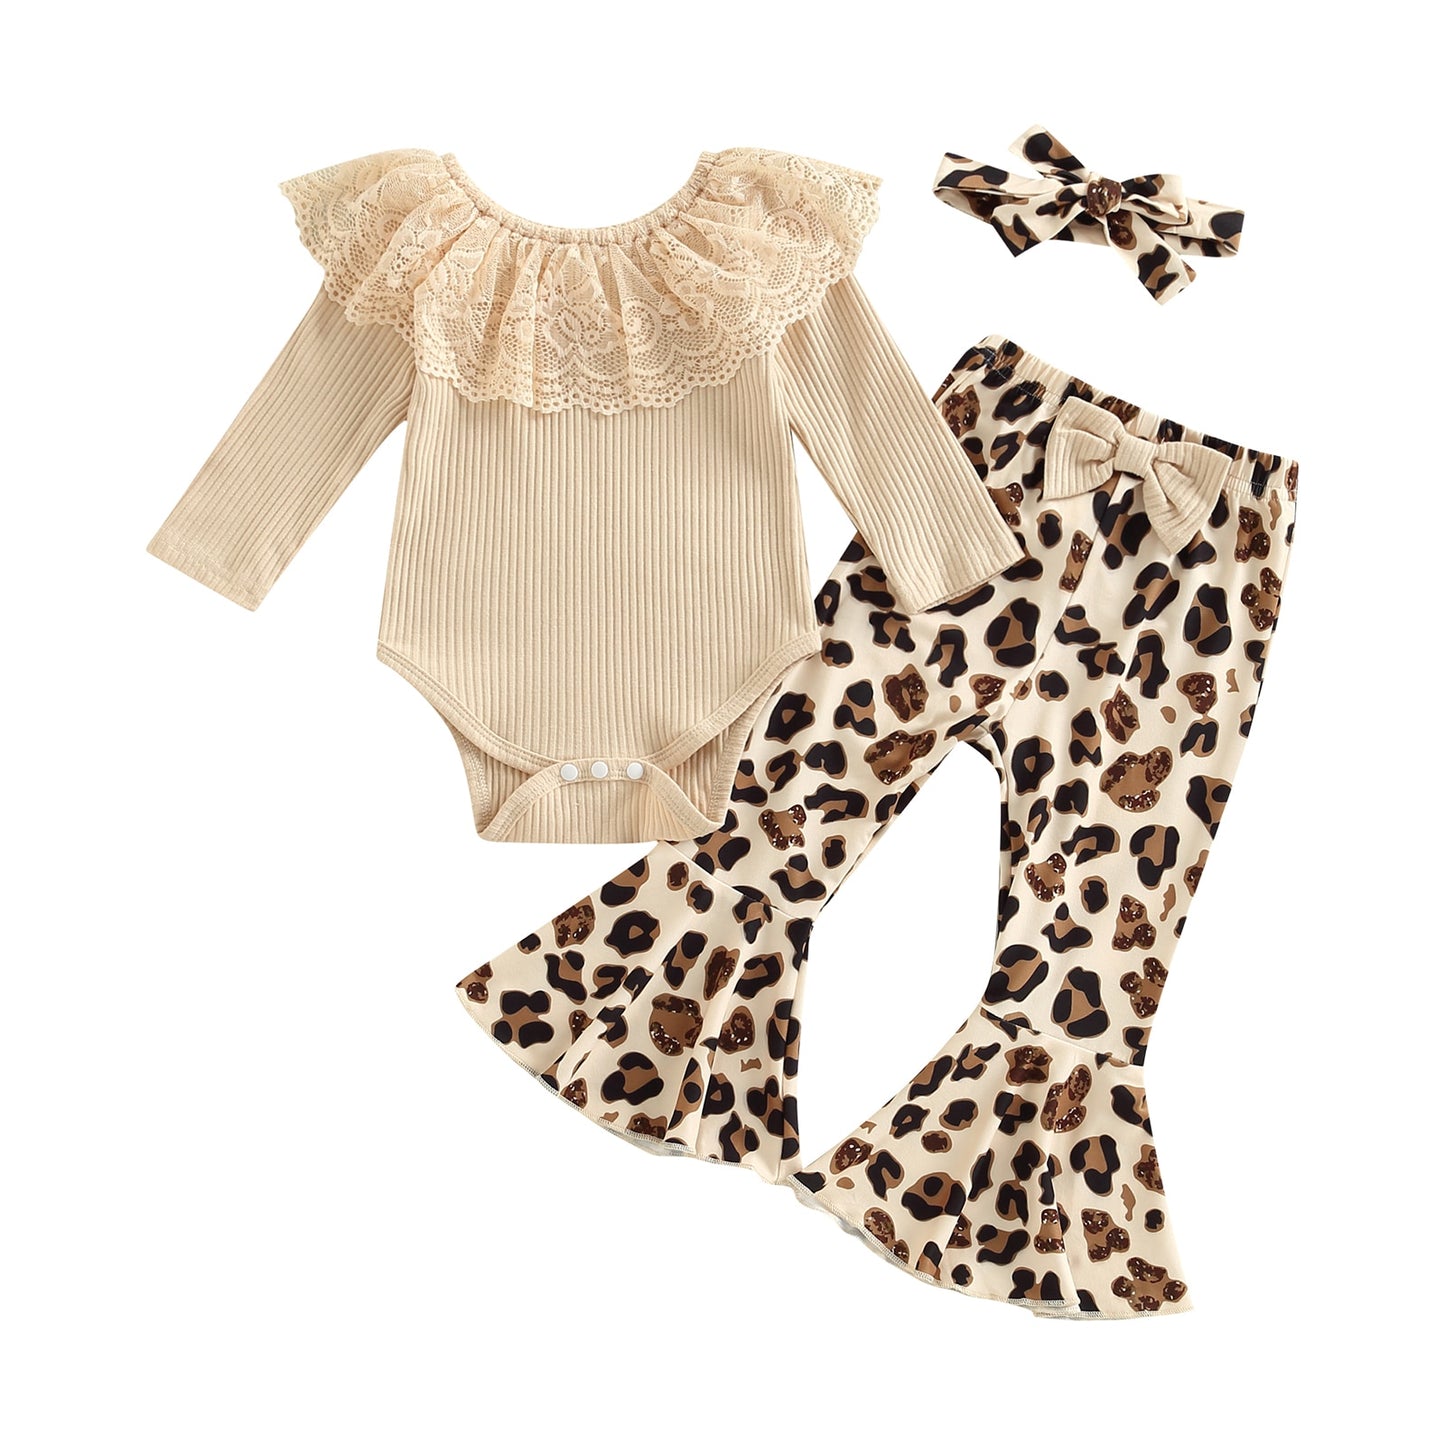 Infant Newborn Baby Girls 3 Pieces Outfit, Lace Ruffles Knitted Ribbed Romper + Leopard/Floral Print Flare Pants + Headband Set